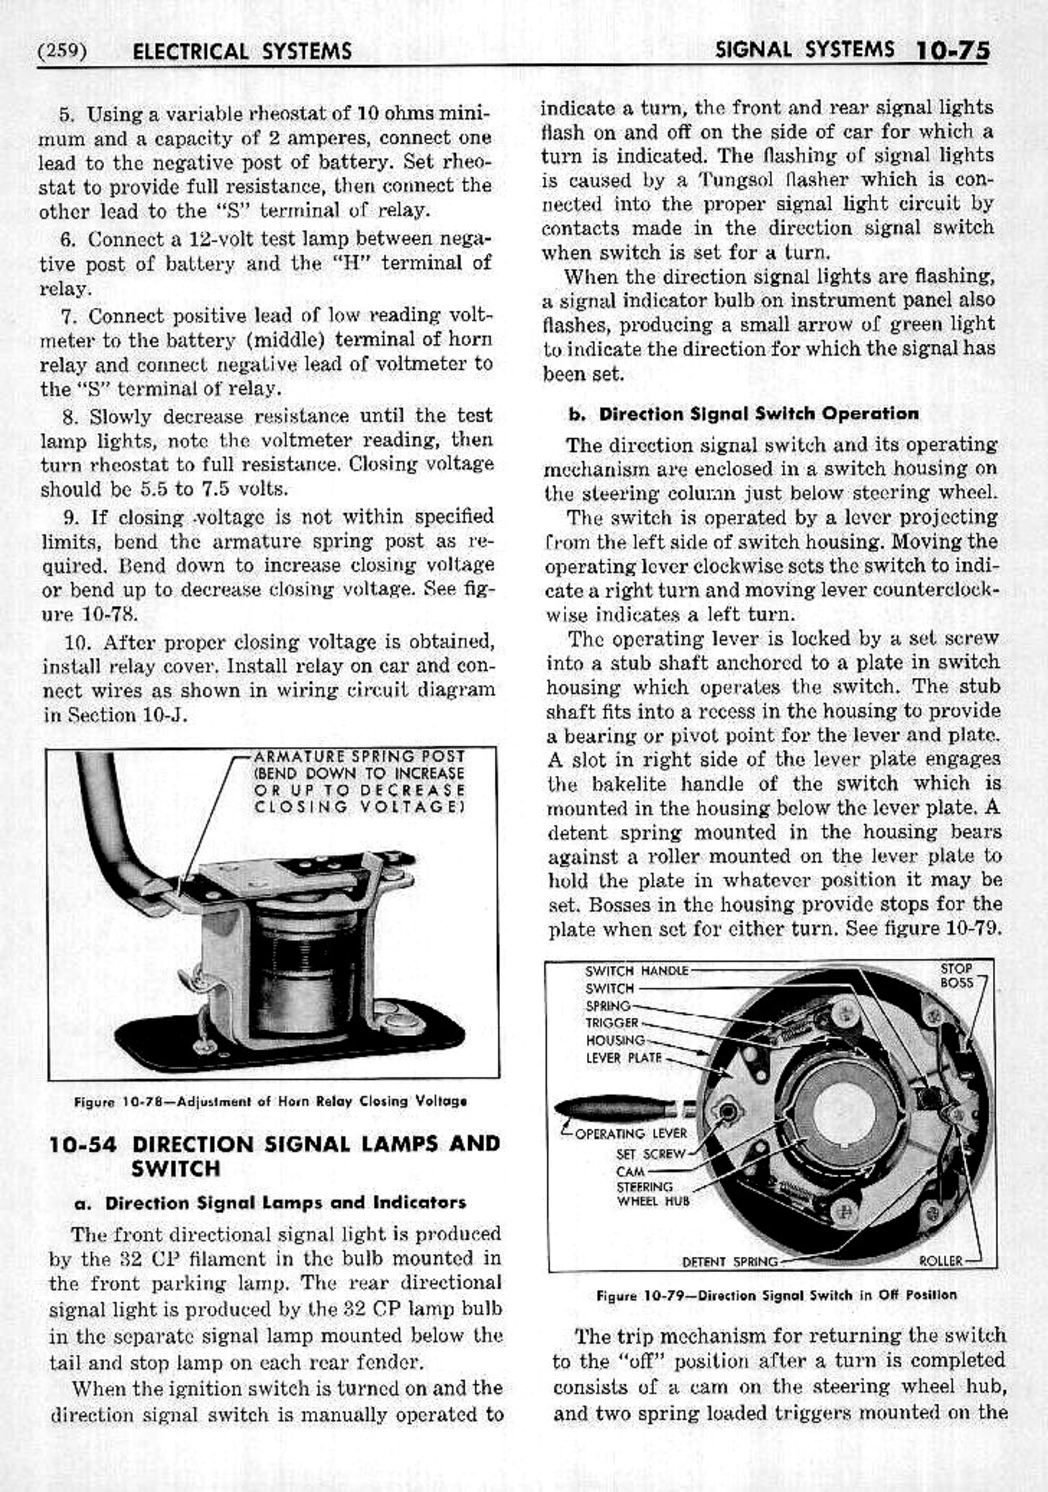 n_11 1953 Buick Shop Manual - Electrical Systems-076-076.jpg